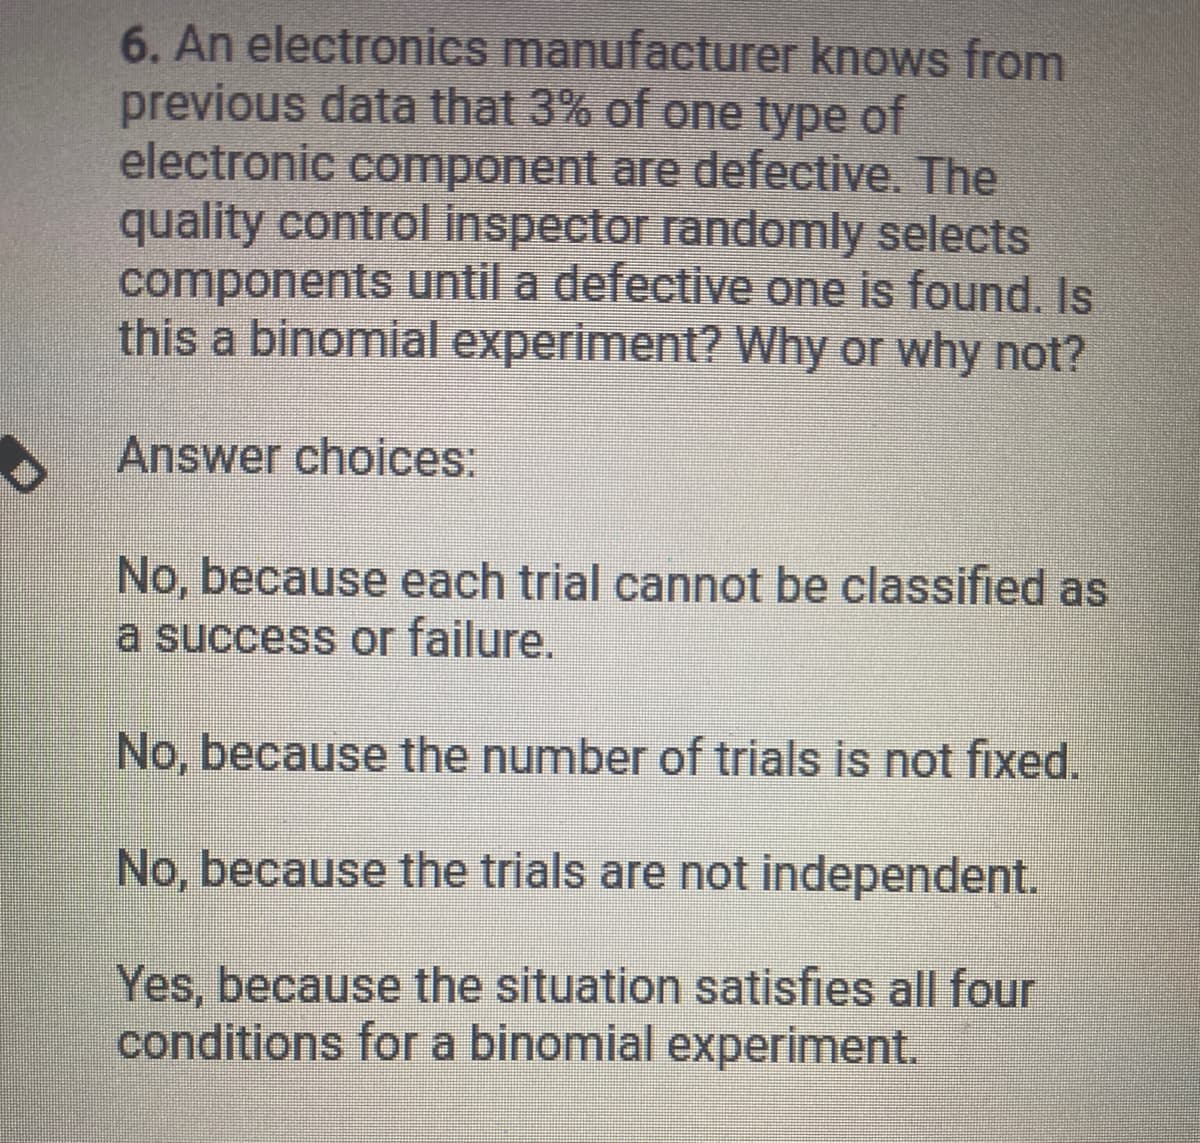 6. An electronics manufacturer knows from
previous data that 3% of one type of
electronic component are defective. The
quality control inspector randomly selects
components until a defective one is found. Is
this a binomial experiment? Why or why not?
Answer choices:
No, because each trial cannot be classified as
a success or failure.
No, because the number of trials is not fixed.
No, because the trials are not independent.
Yes, because the situation satisfies all four
conditions for a binomial experiment.